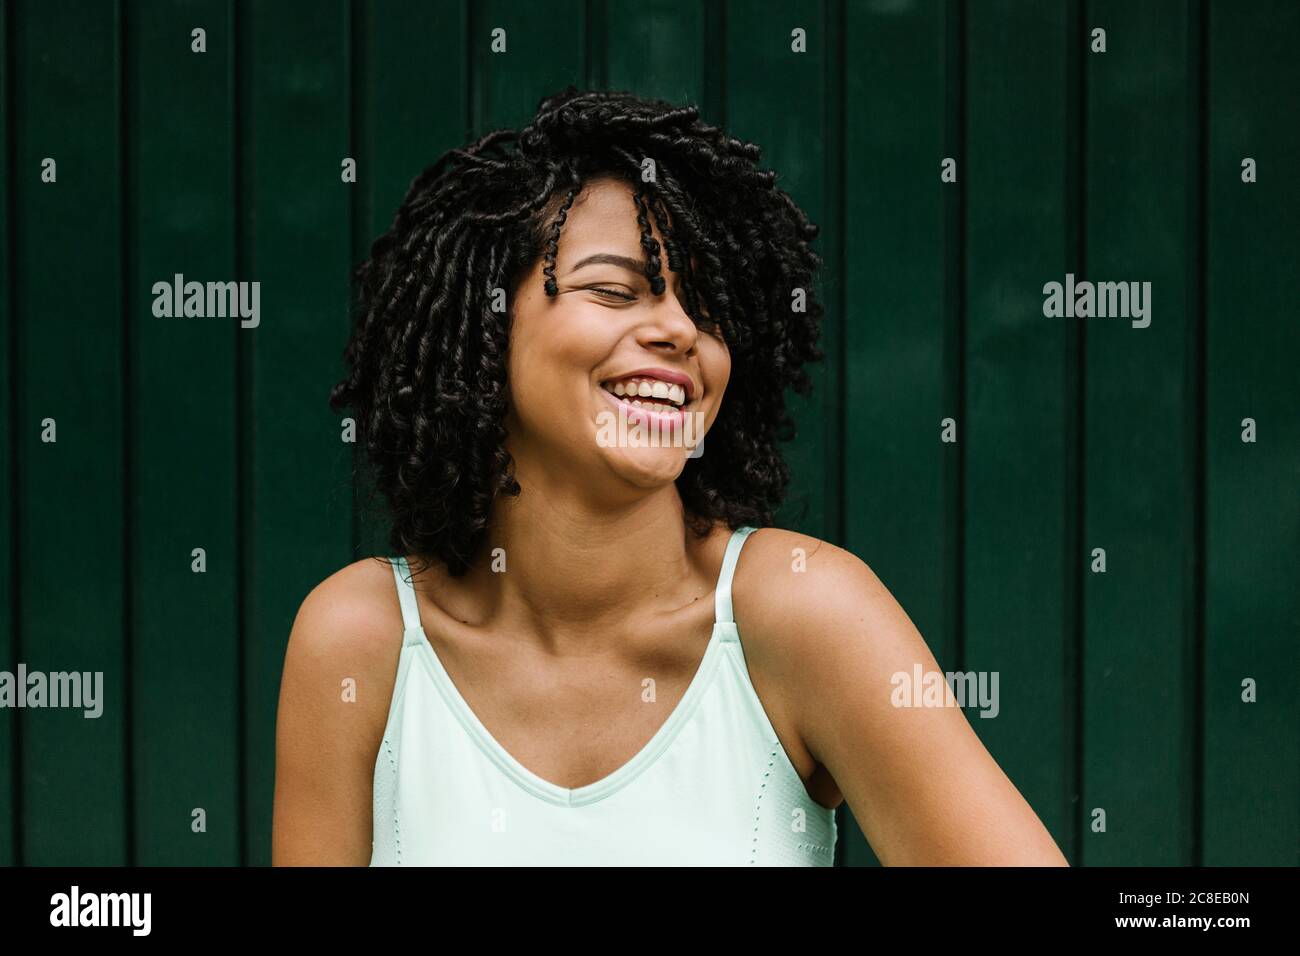 Cheerful young woman with eyes closed standing against metal door Stock Photo